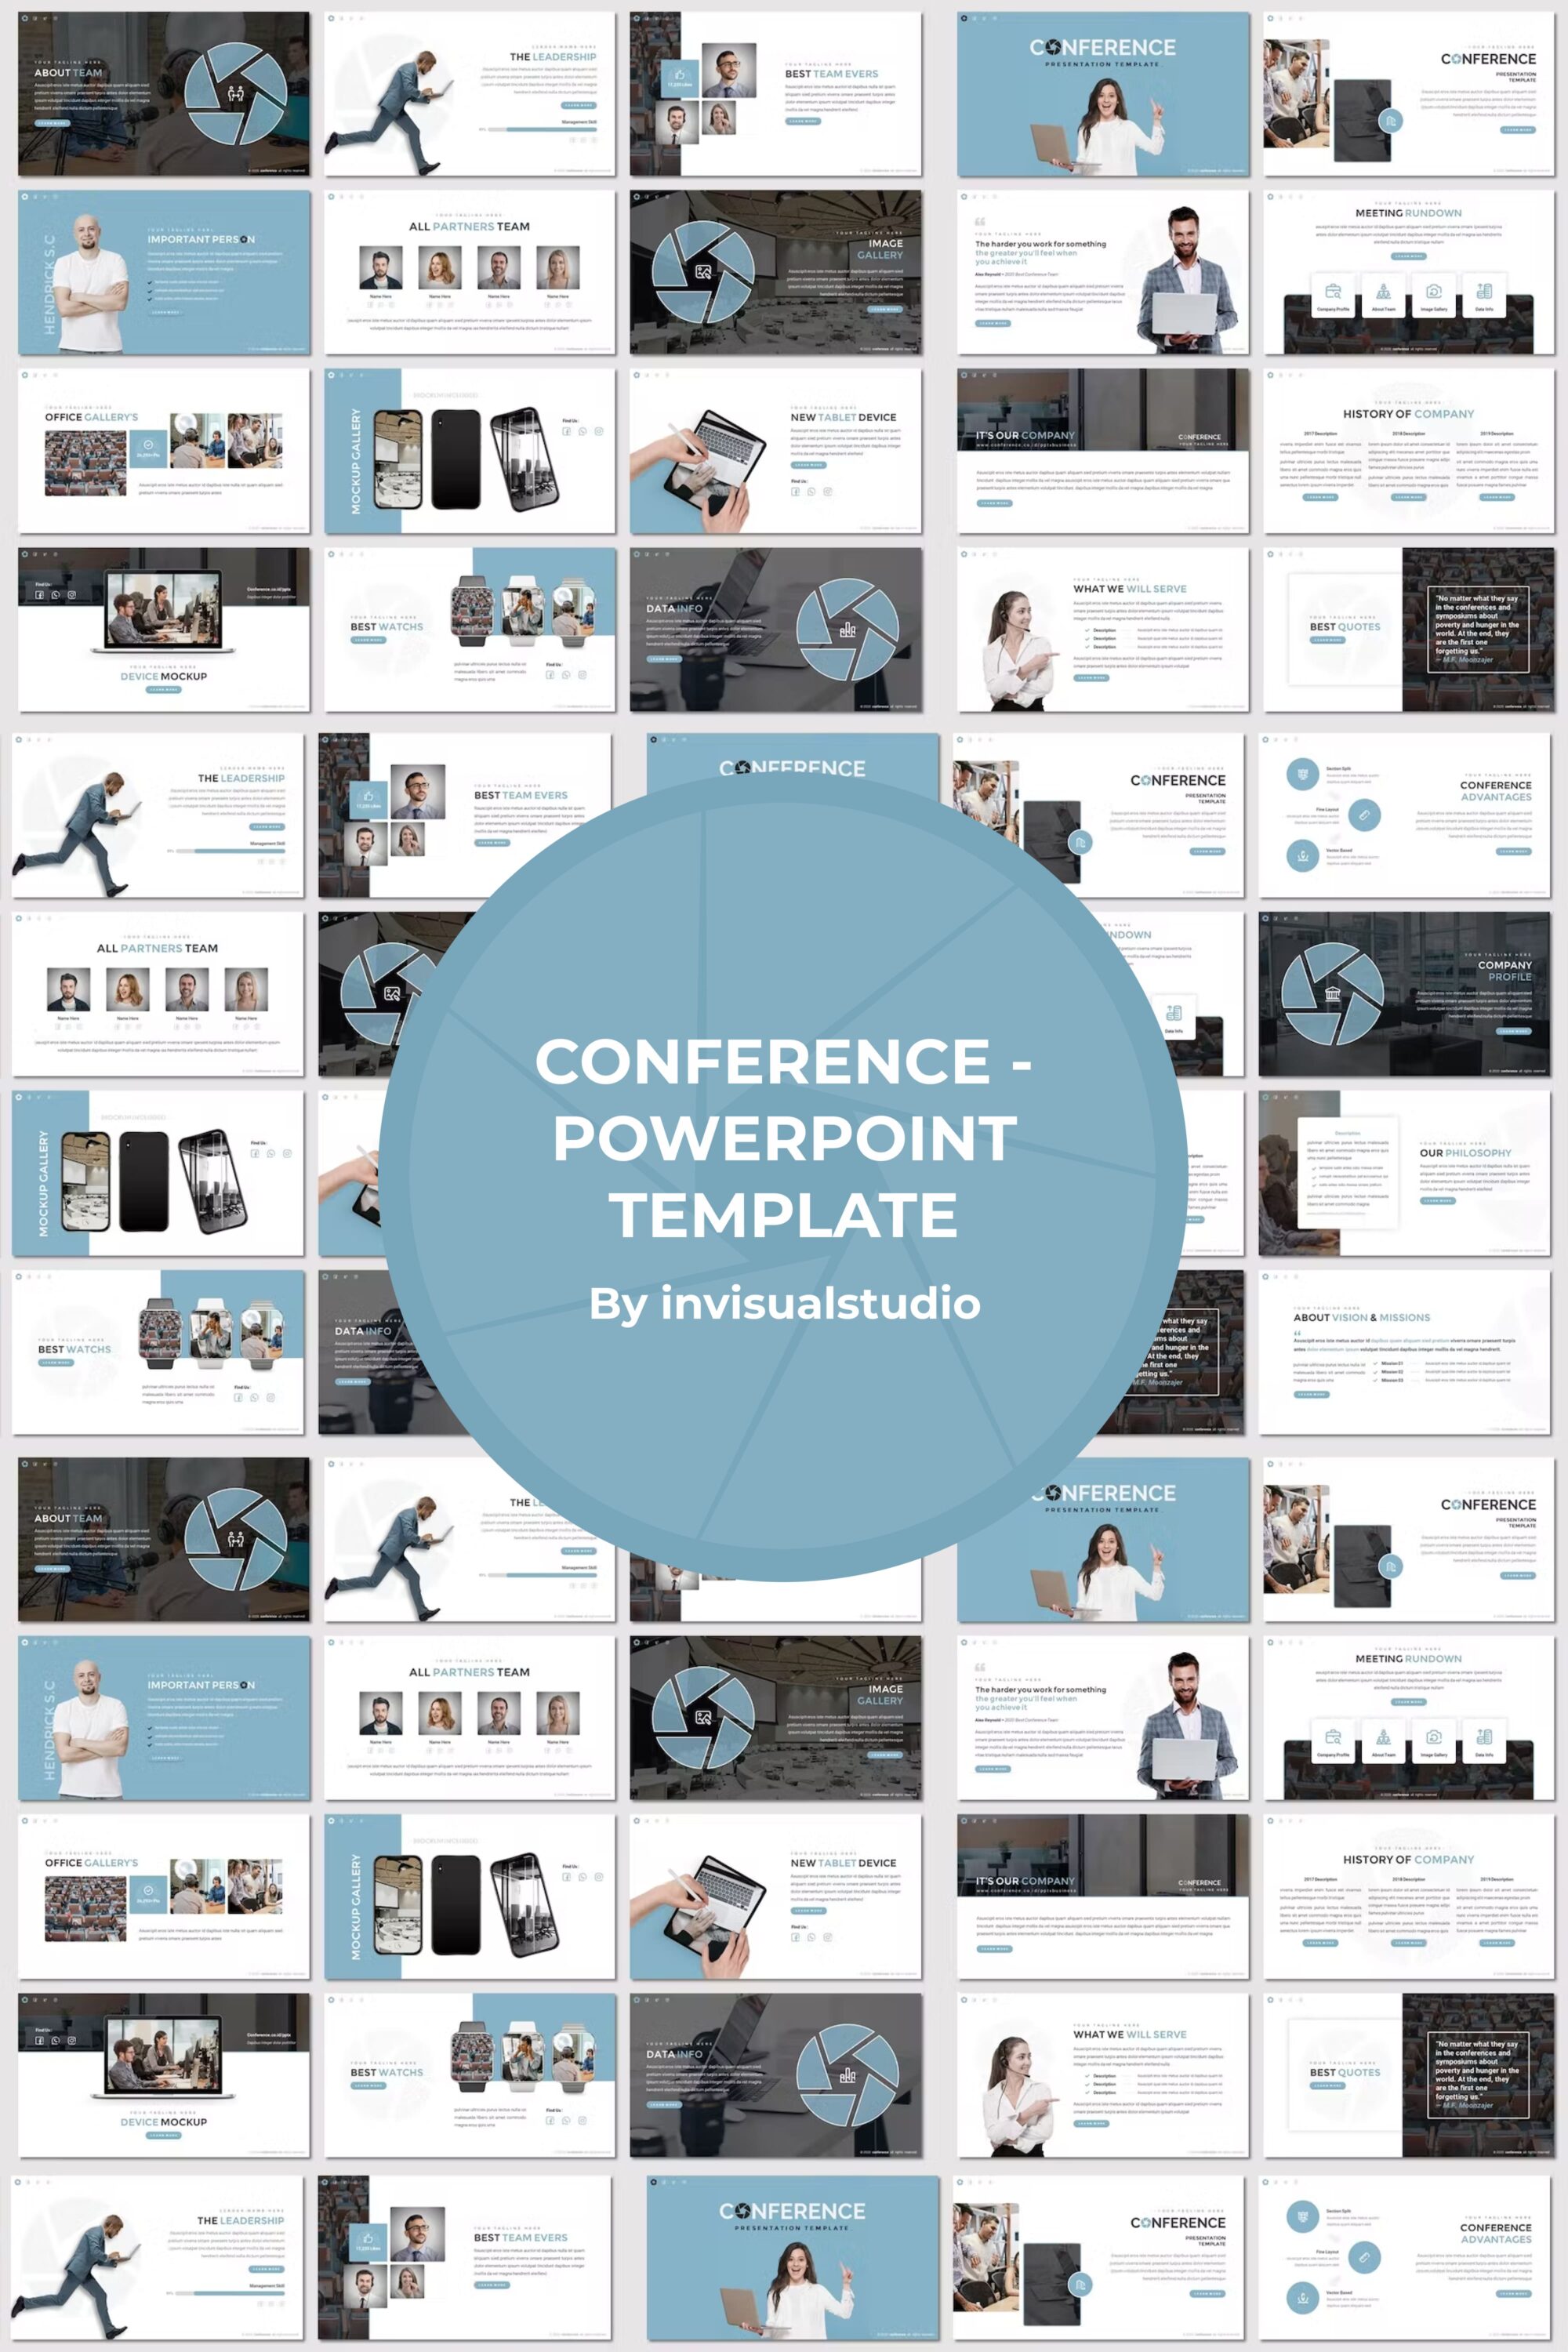 Conference powerpoint template of pinterest.